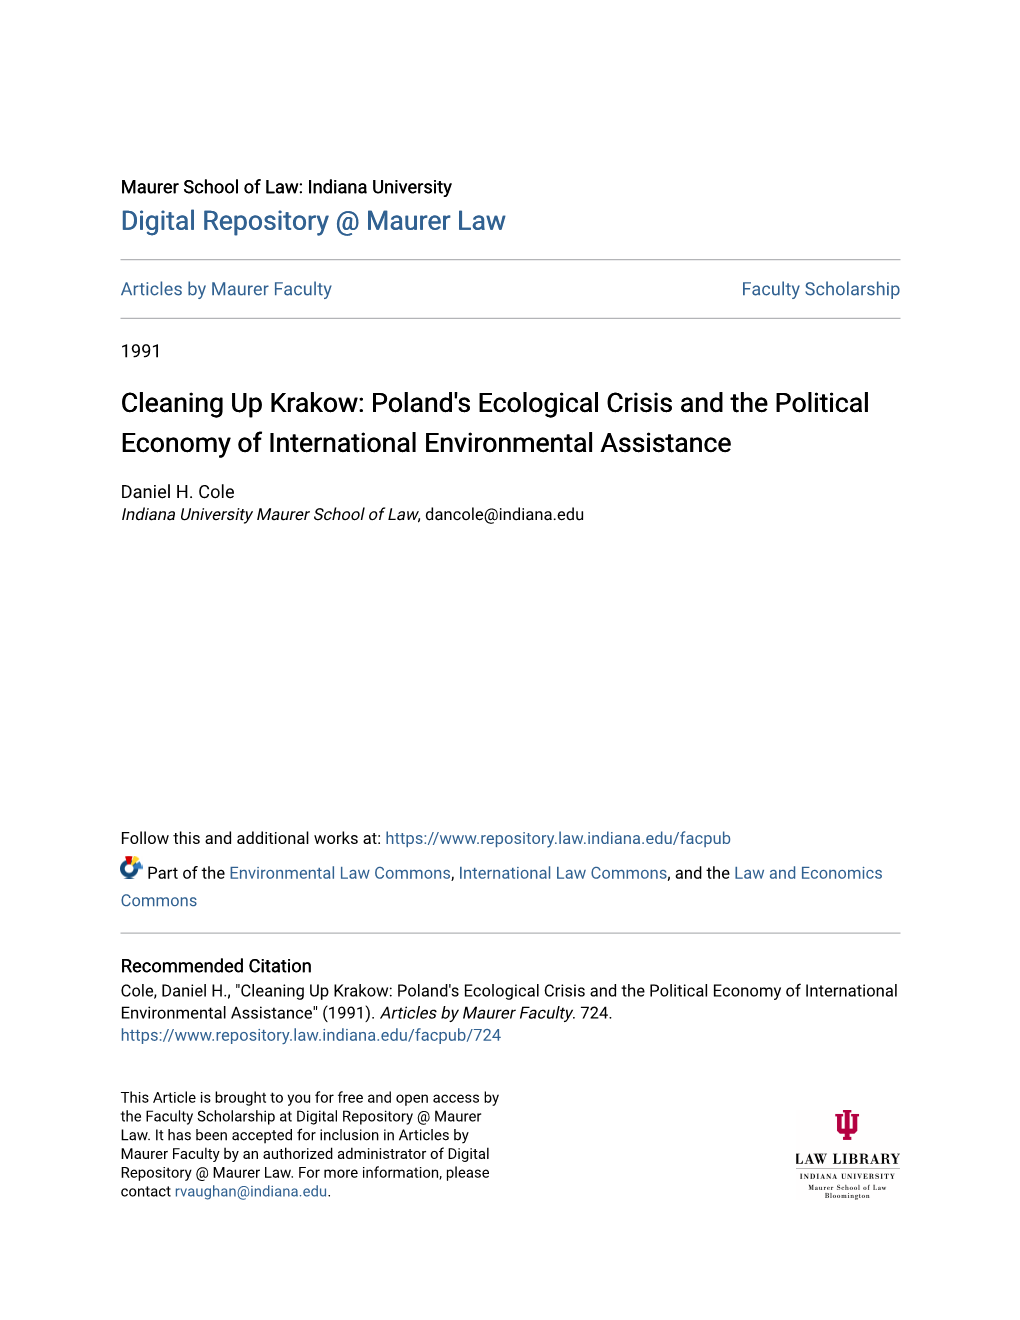 Cleaning up Krakow: Poland's Ecological Crisis and the Political Economy of International Environmental Assistance